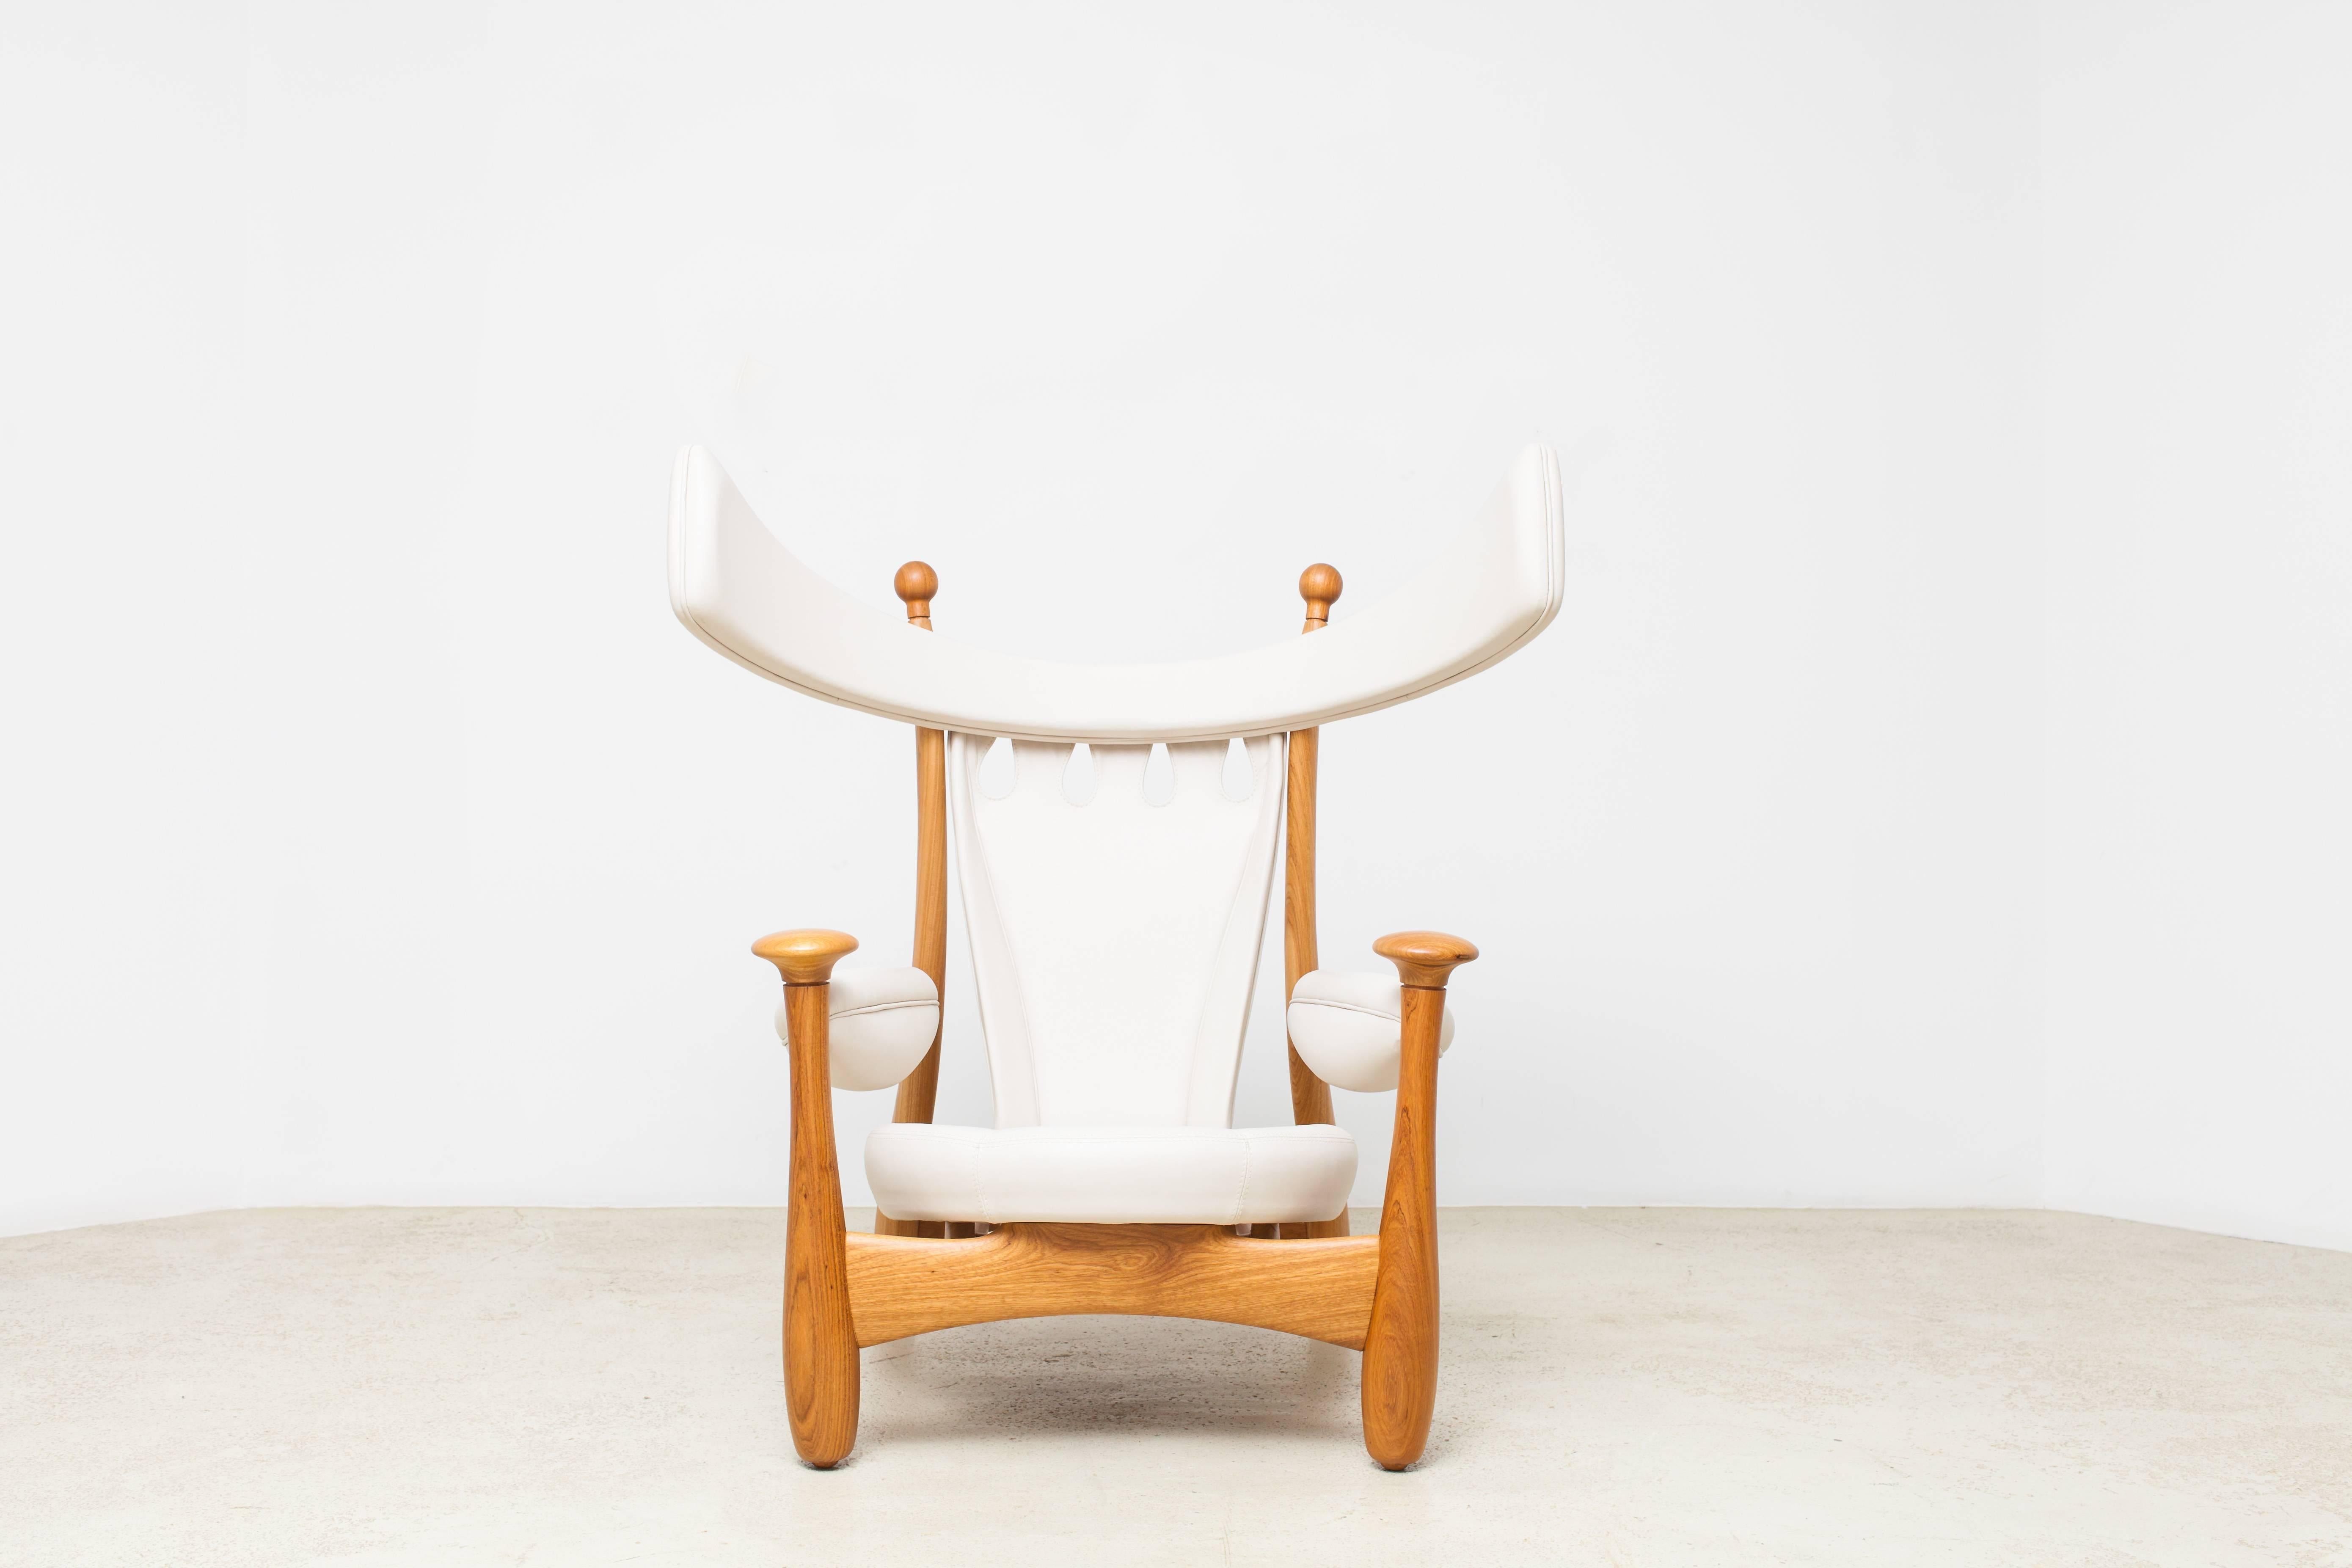 Limited Edition Chifruda Armchair by Sergio Rodrigues In Excellent Condition For Sale In New York, NY